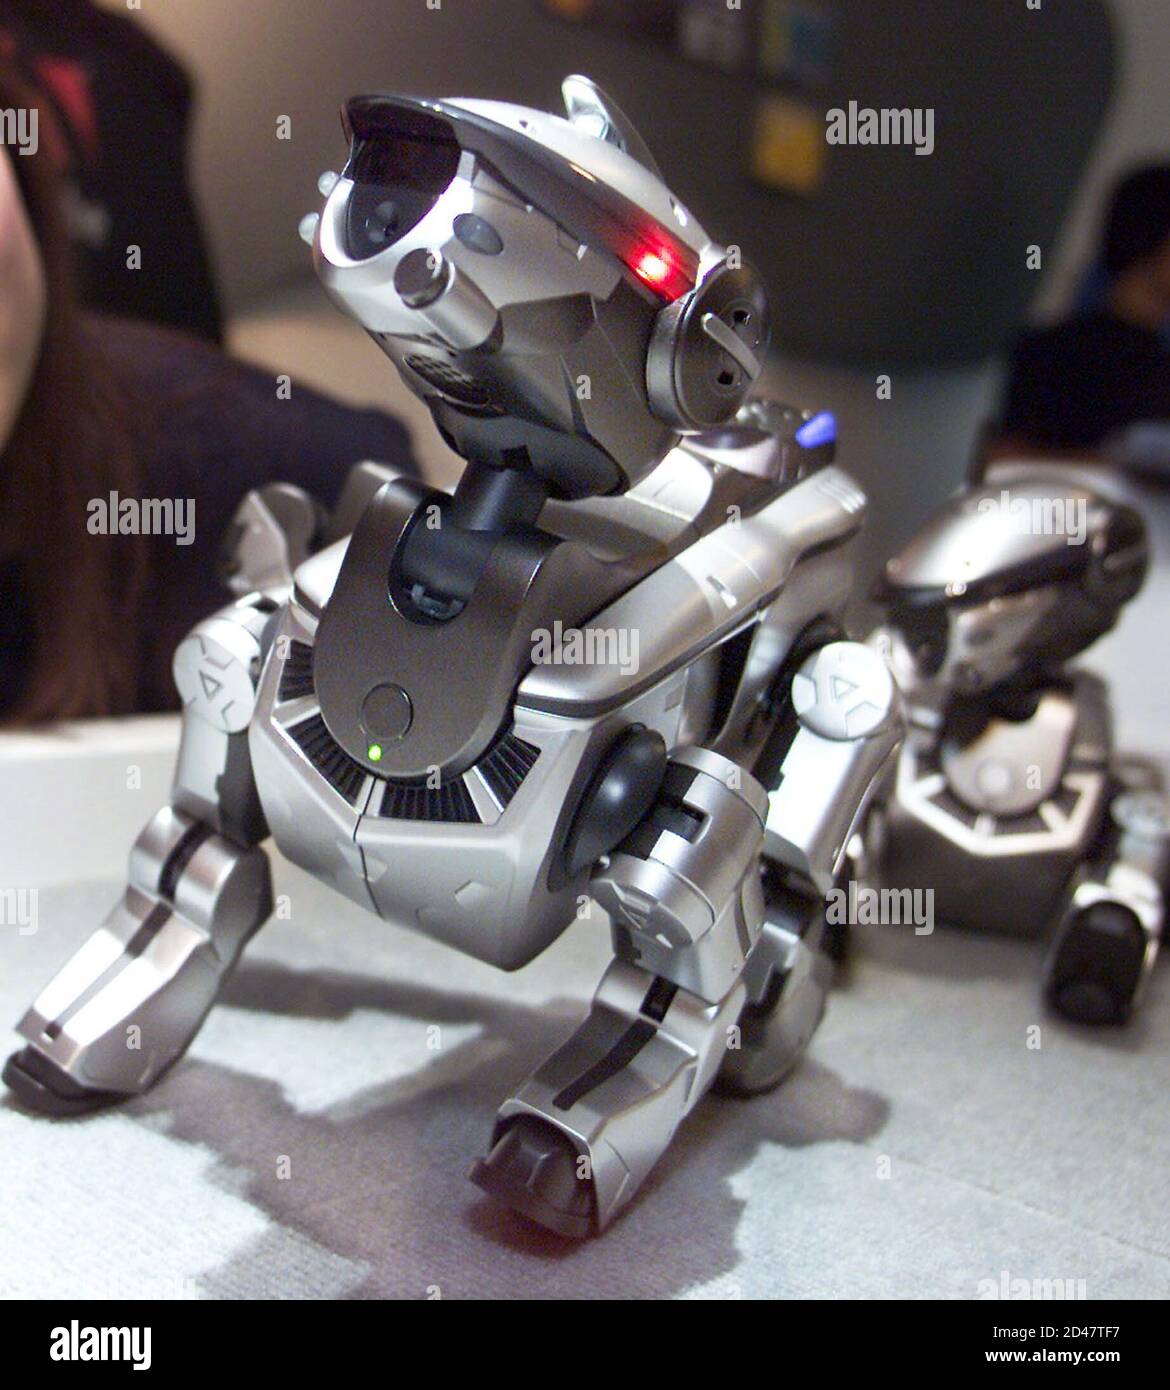 Hykler malm at fortsætte Sony presents the new Aibo (ERS-220) entertainment robot as it dances at an  unveiling in Tokyo November 8, 2001. The highly futuristic robot boasts new  hardware features including 19 LEDs located around